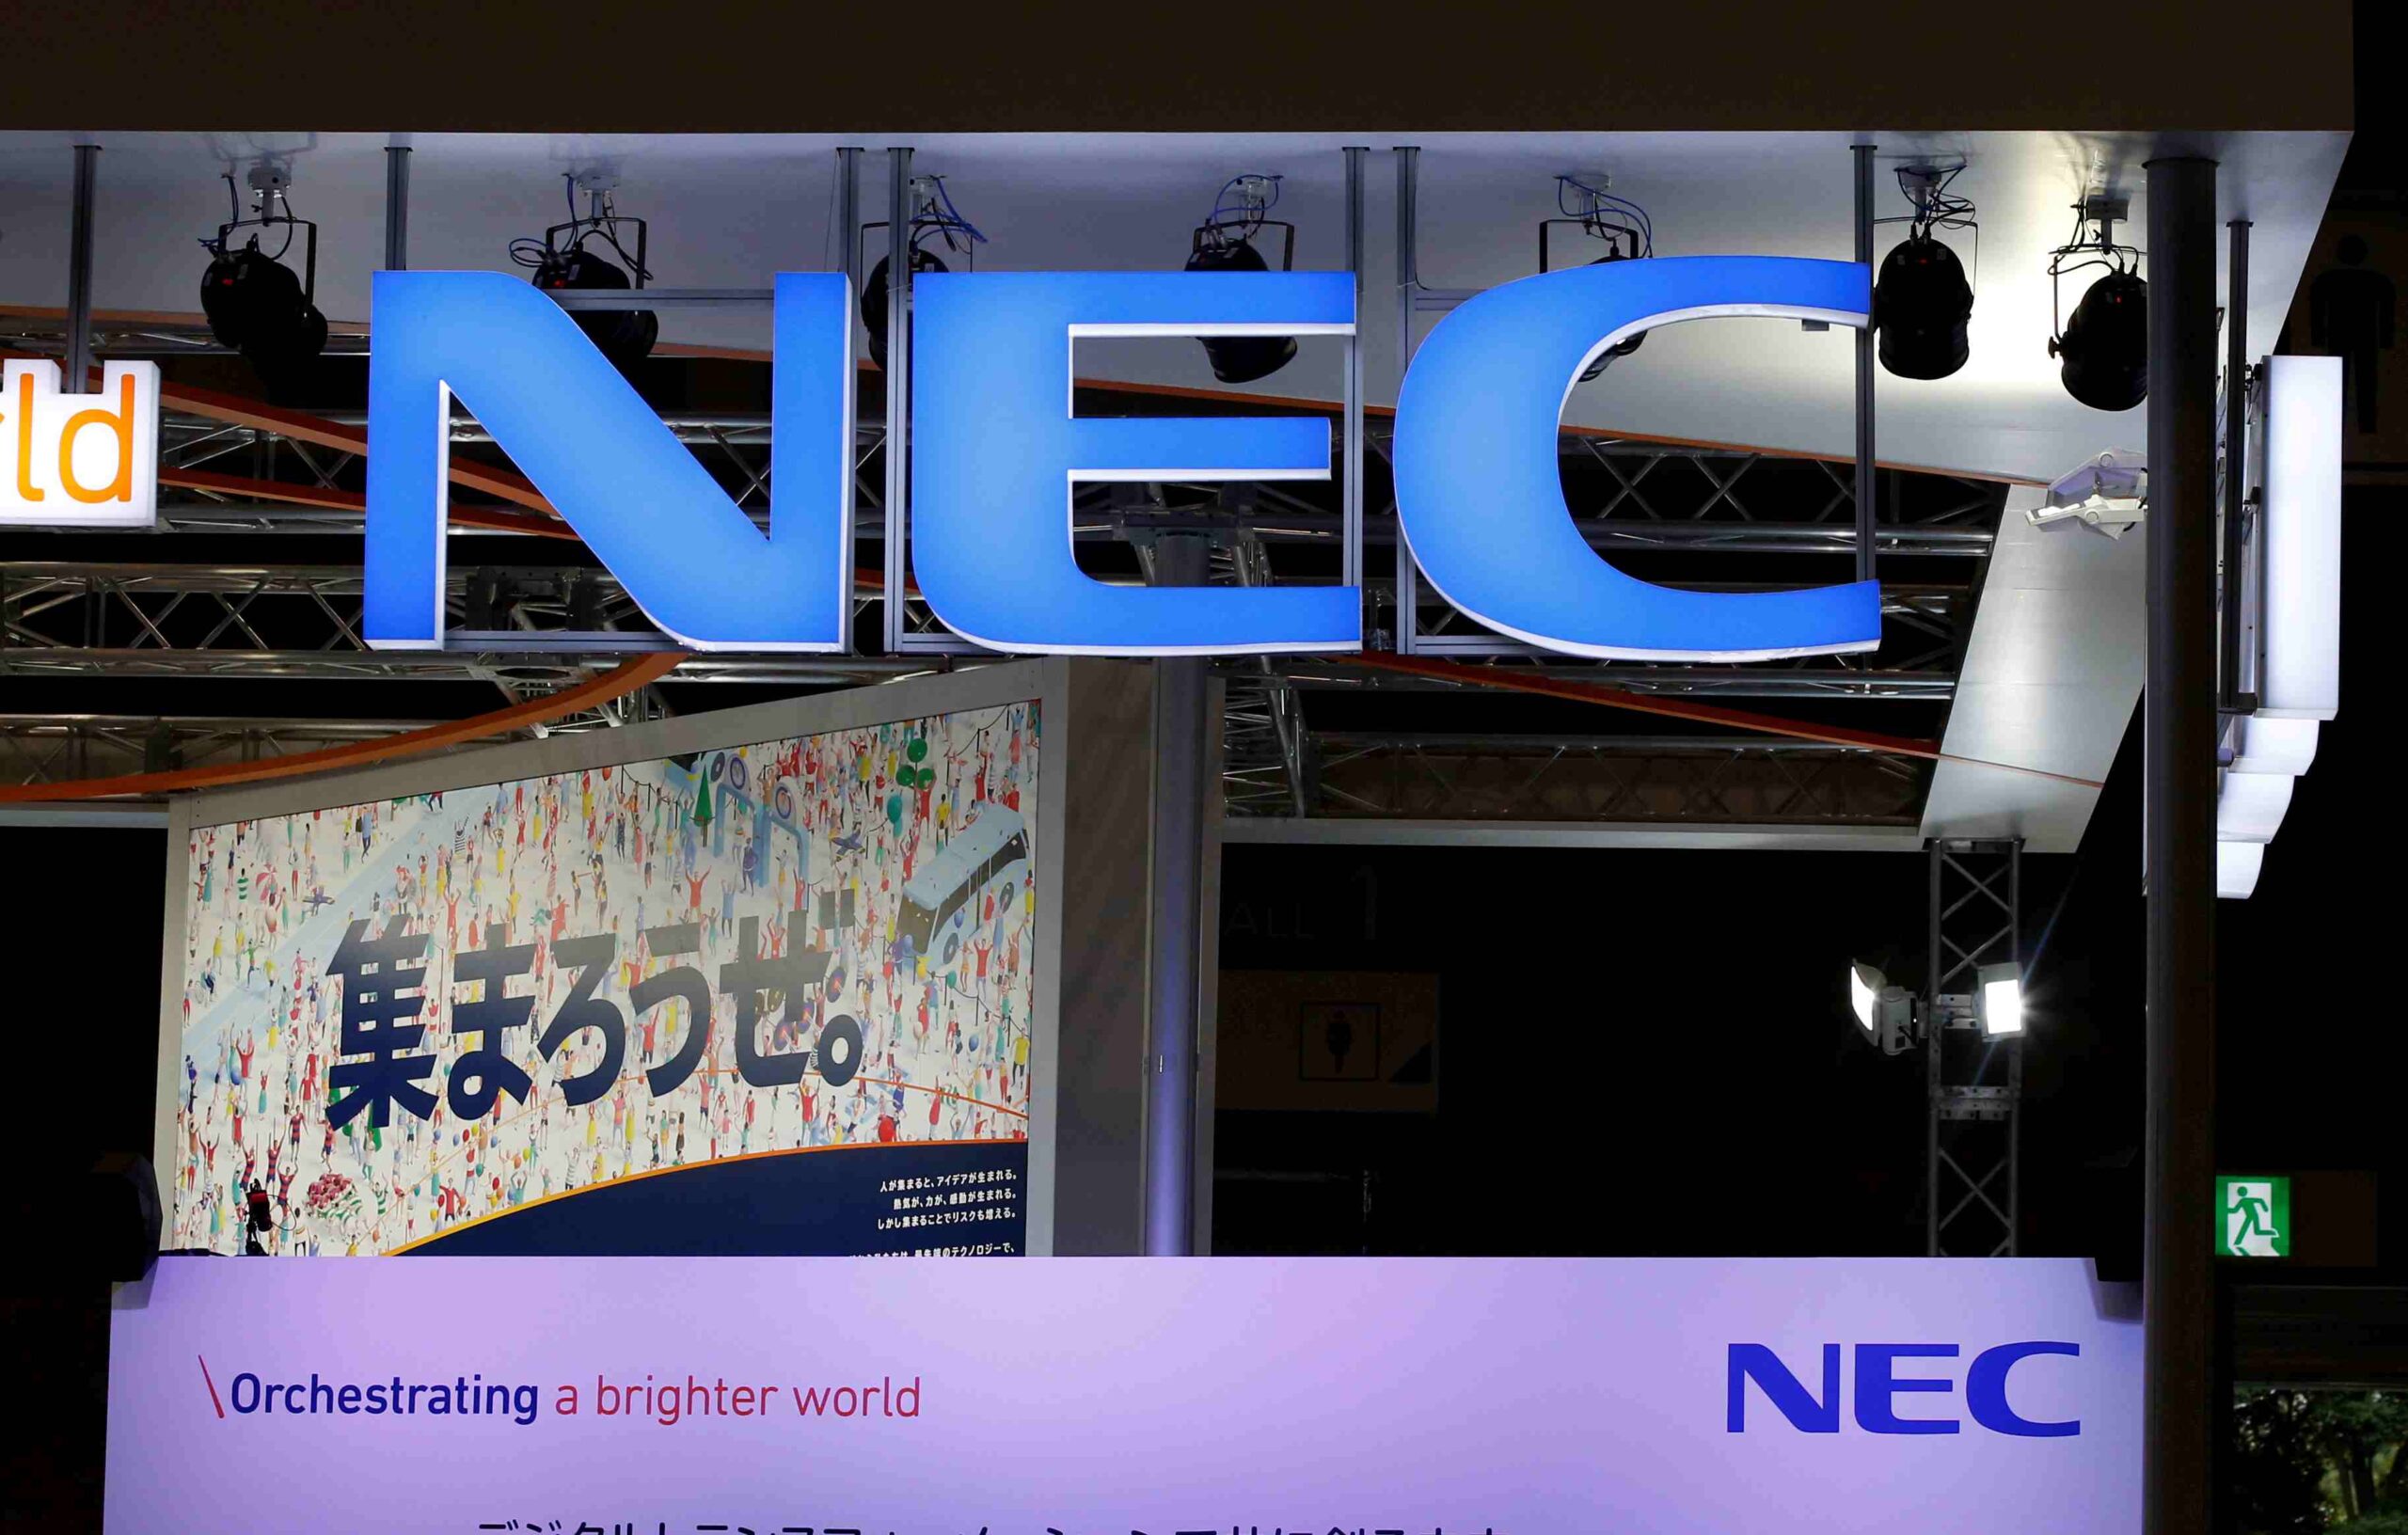 NEC spurned private equity offers before selling discounted stake in iPhone supplier, sources say